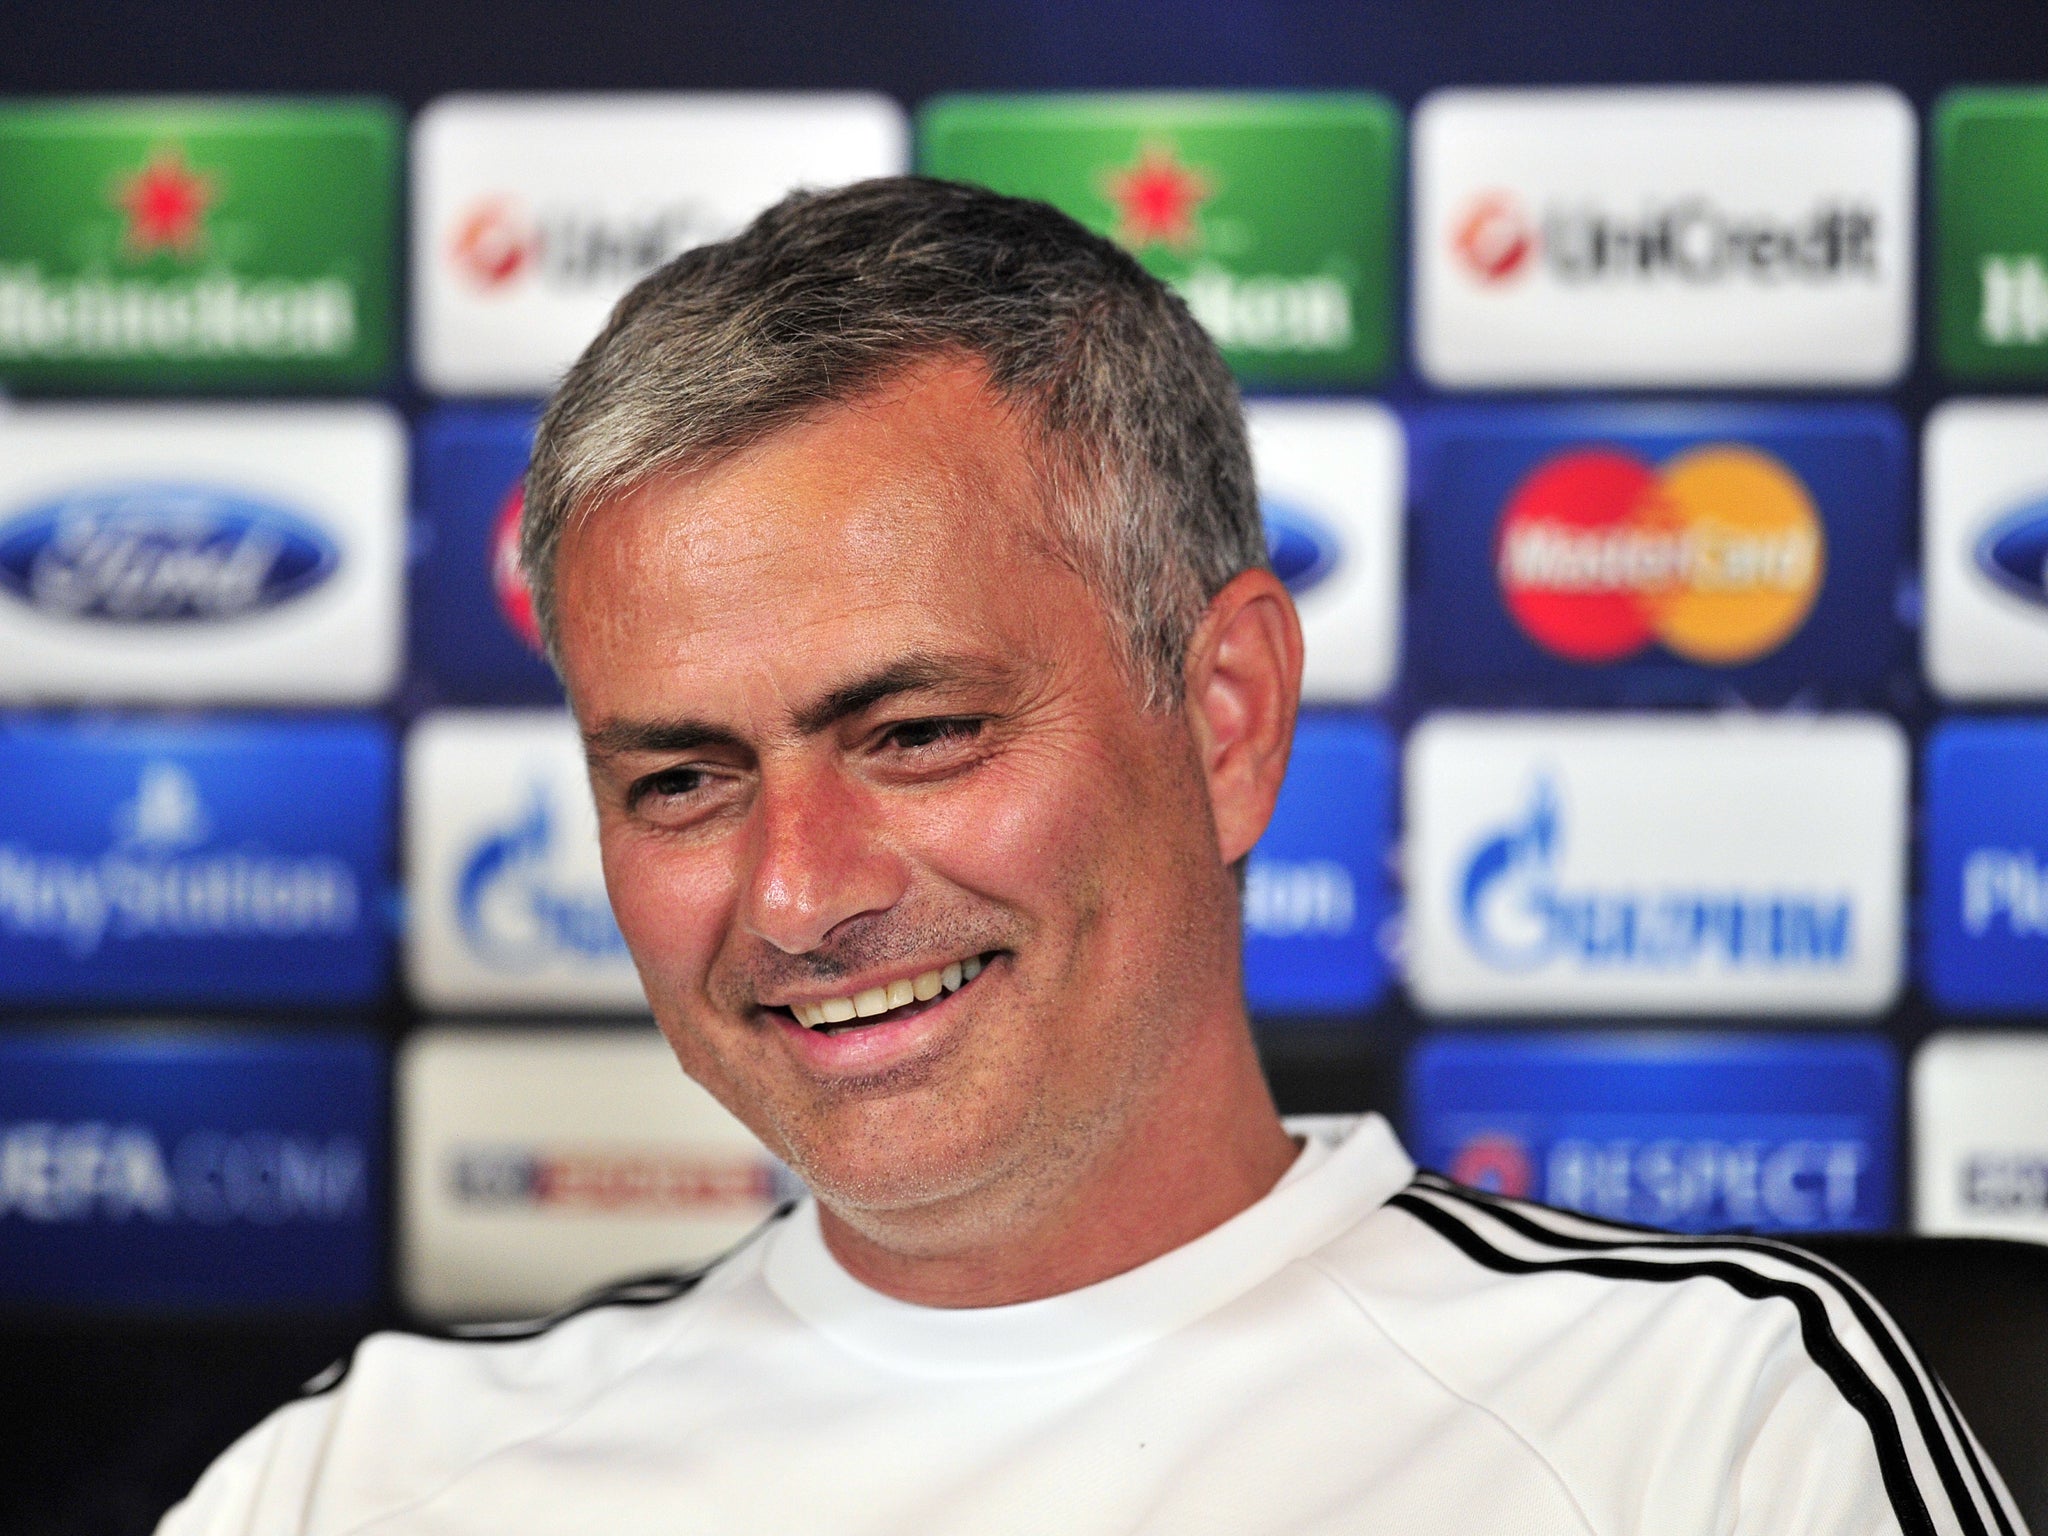 Jose Mourinho speaks during a Chelsea press conference